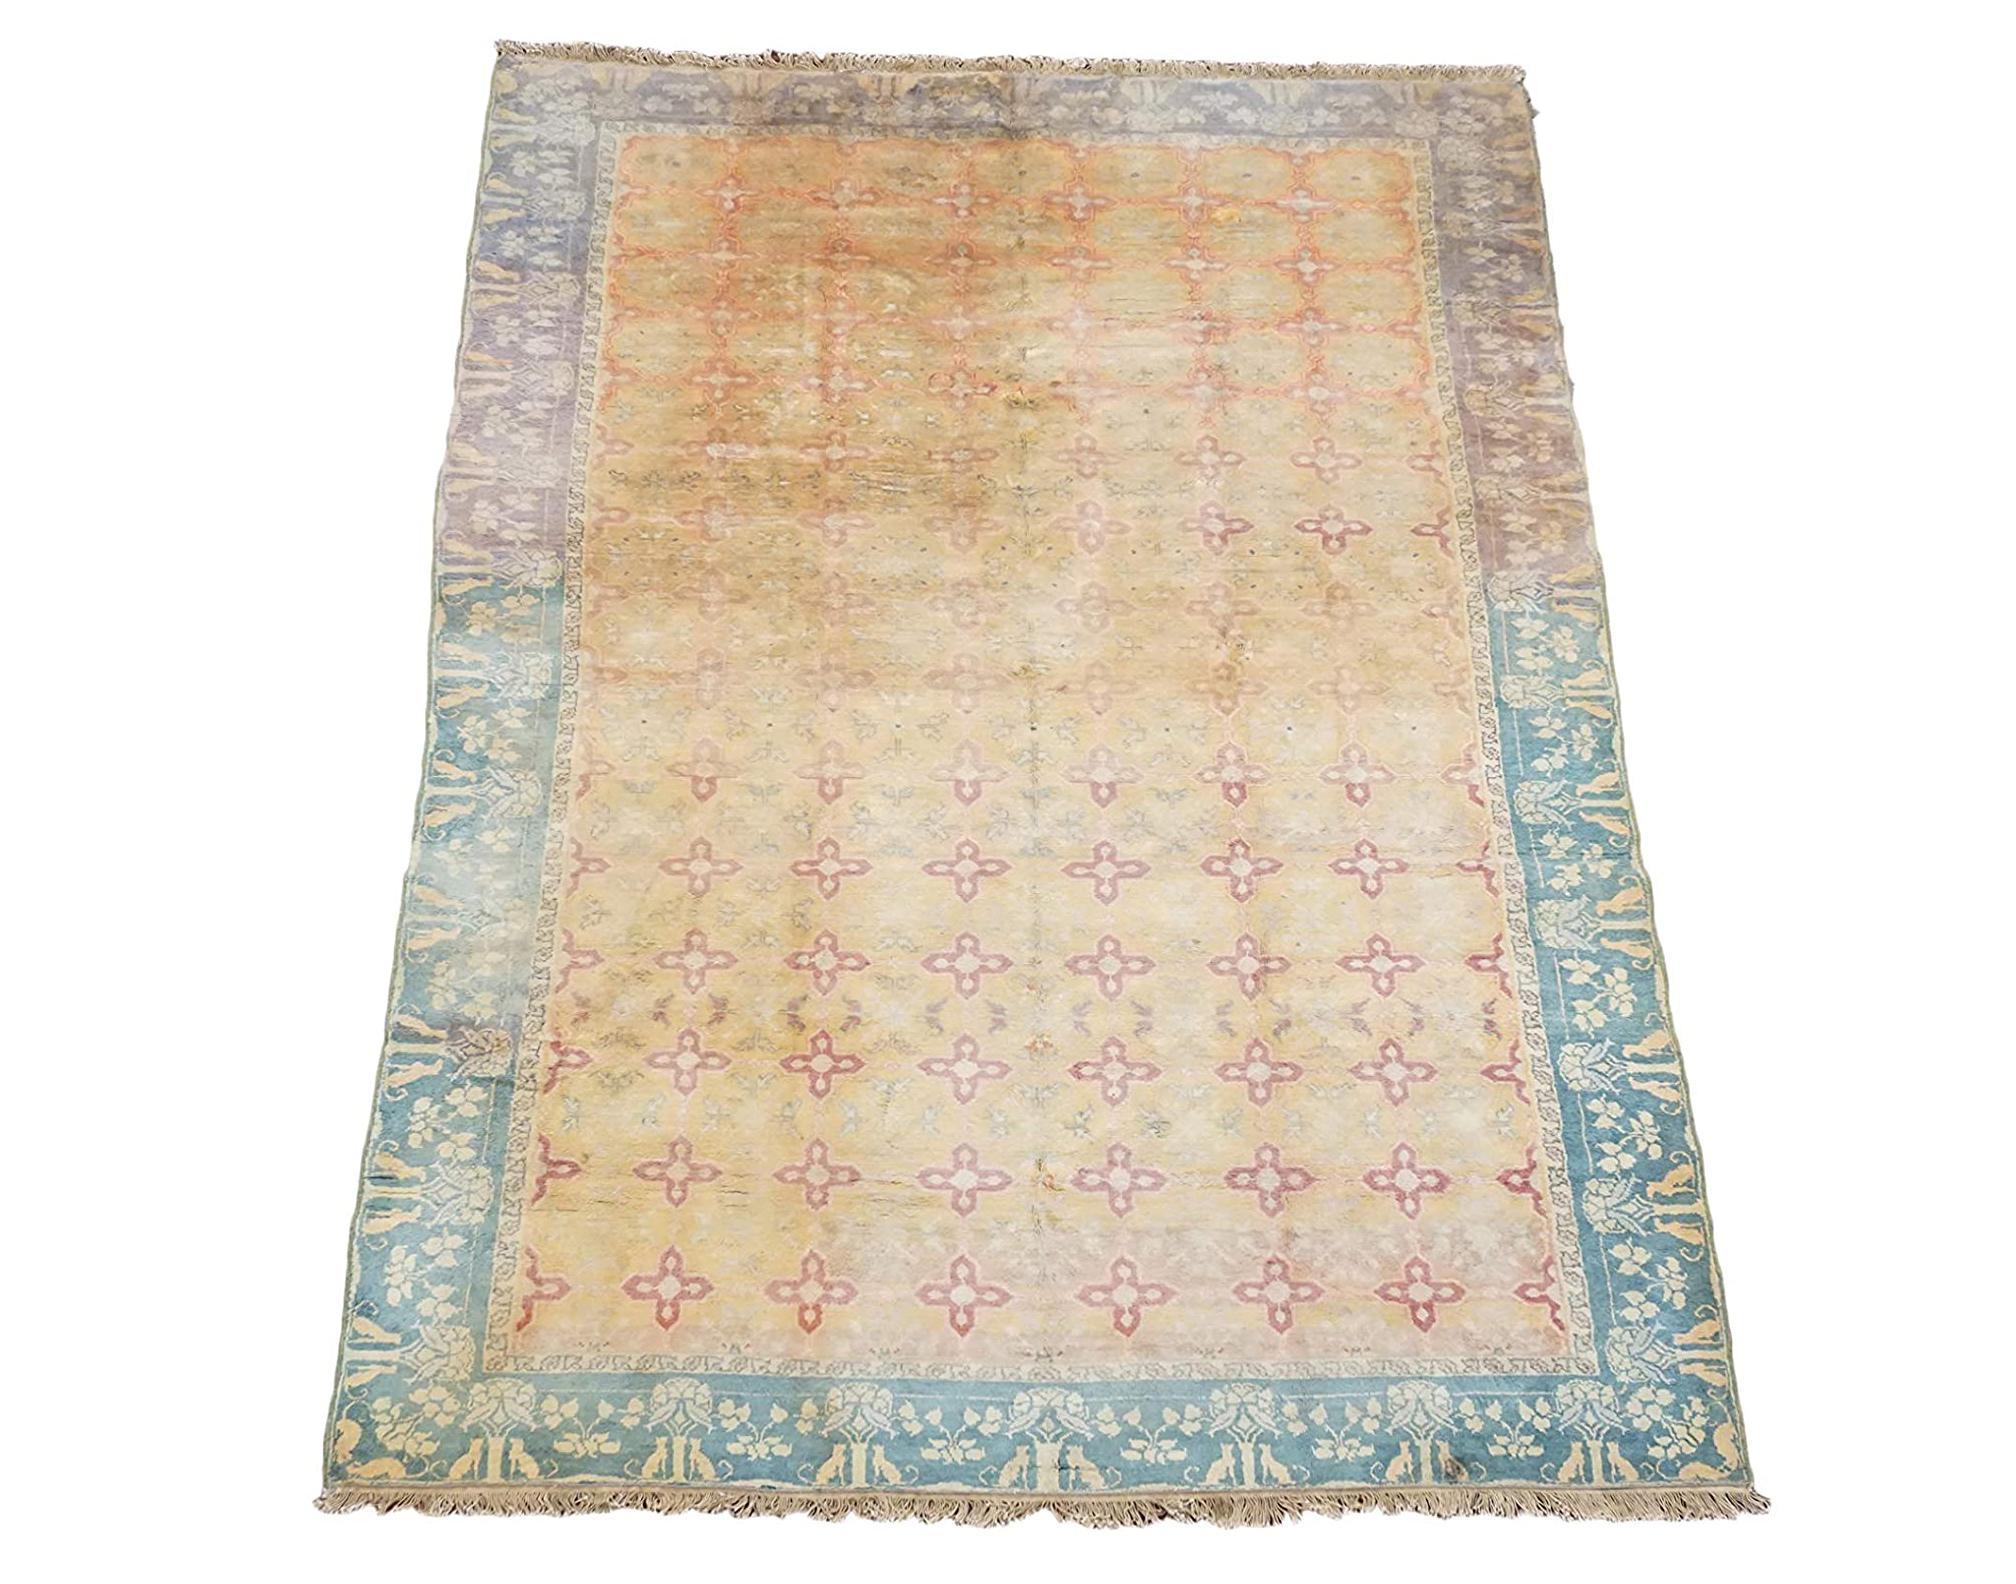 Hand-knotted abrash cotton pile on a cotton foundation.

Circa 1920

Dimensions: 5'11